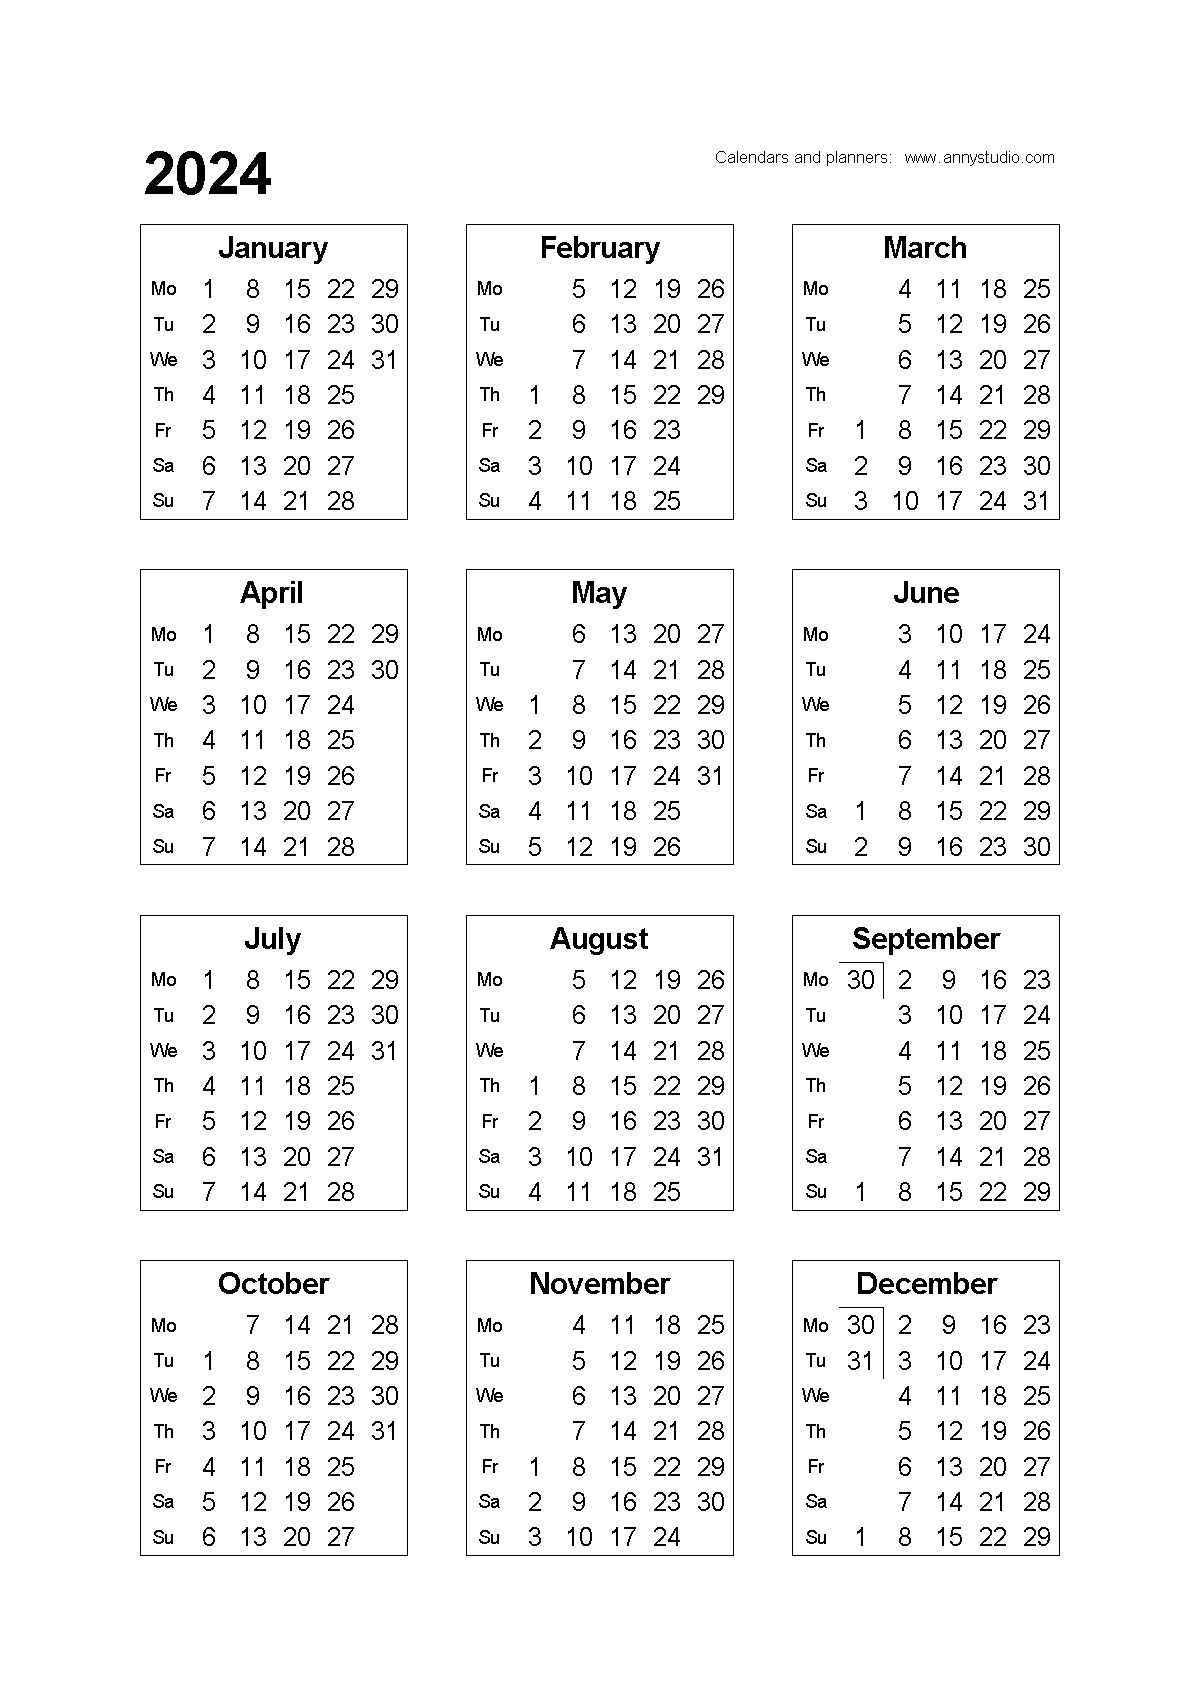 Free Printable Calendars And Planners 2024, 2025 And 2026 | Free Printable Calendar 2024 Ireland